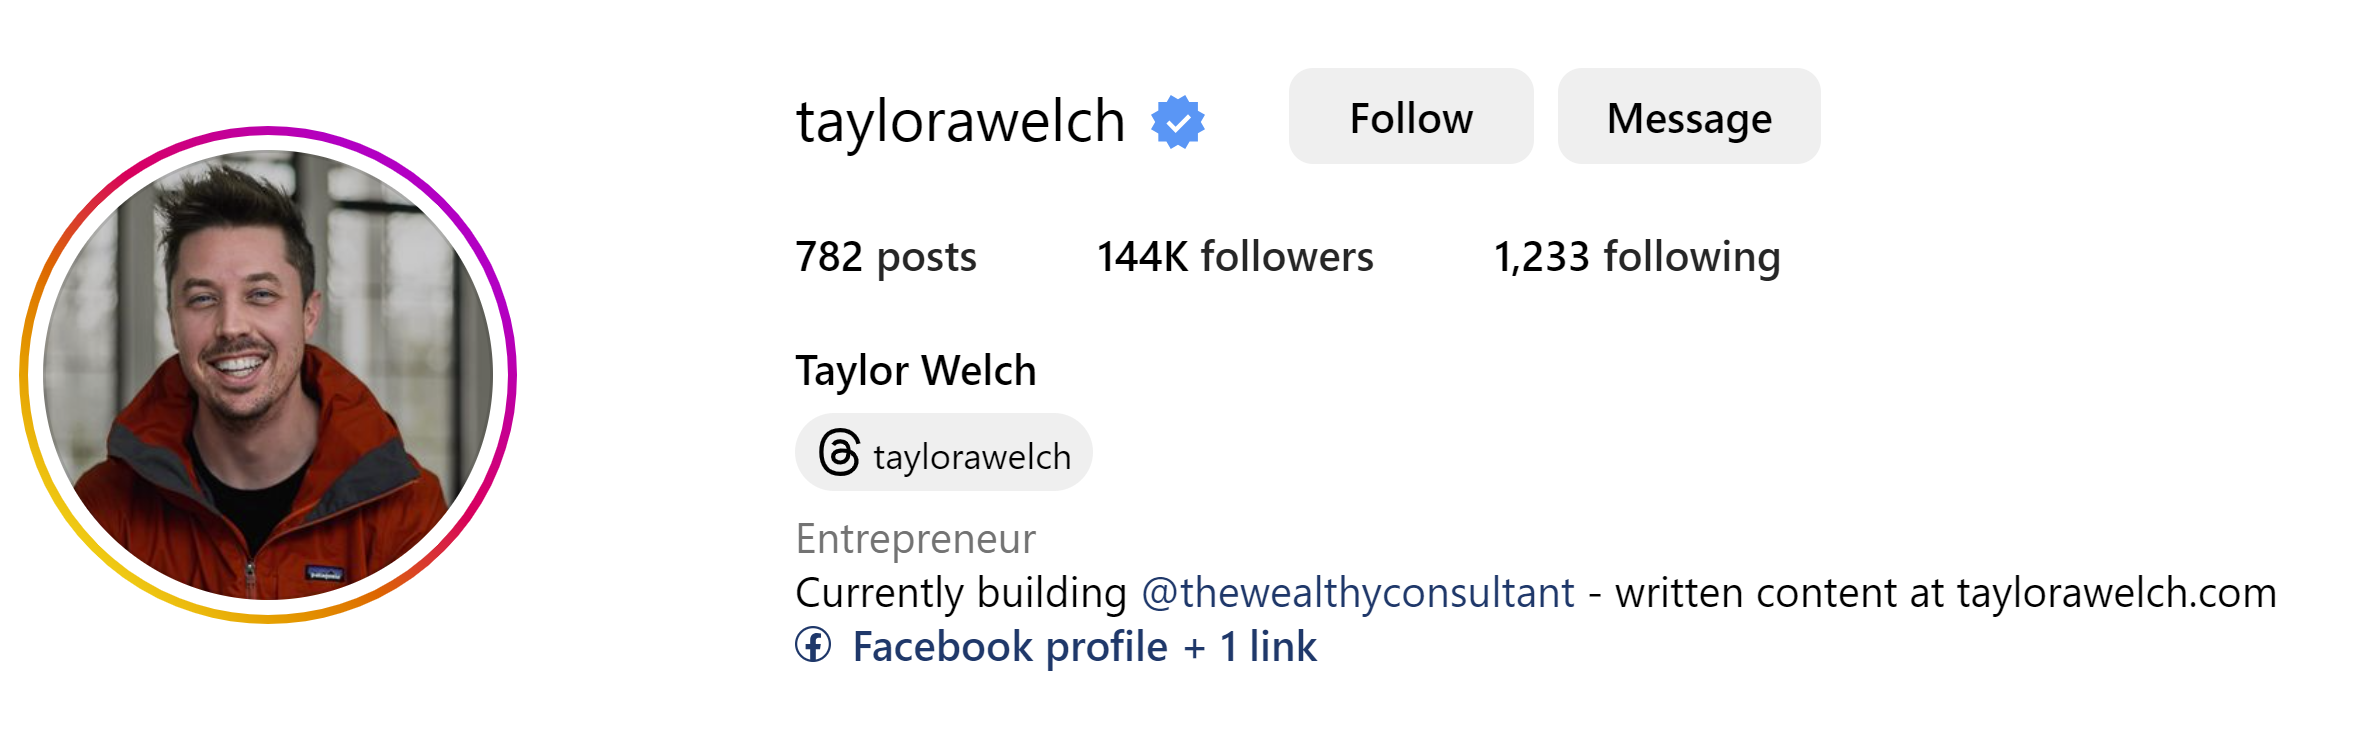 Who Is Taylor Welch